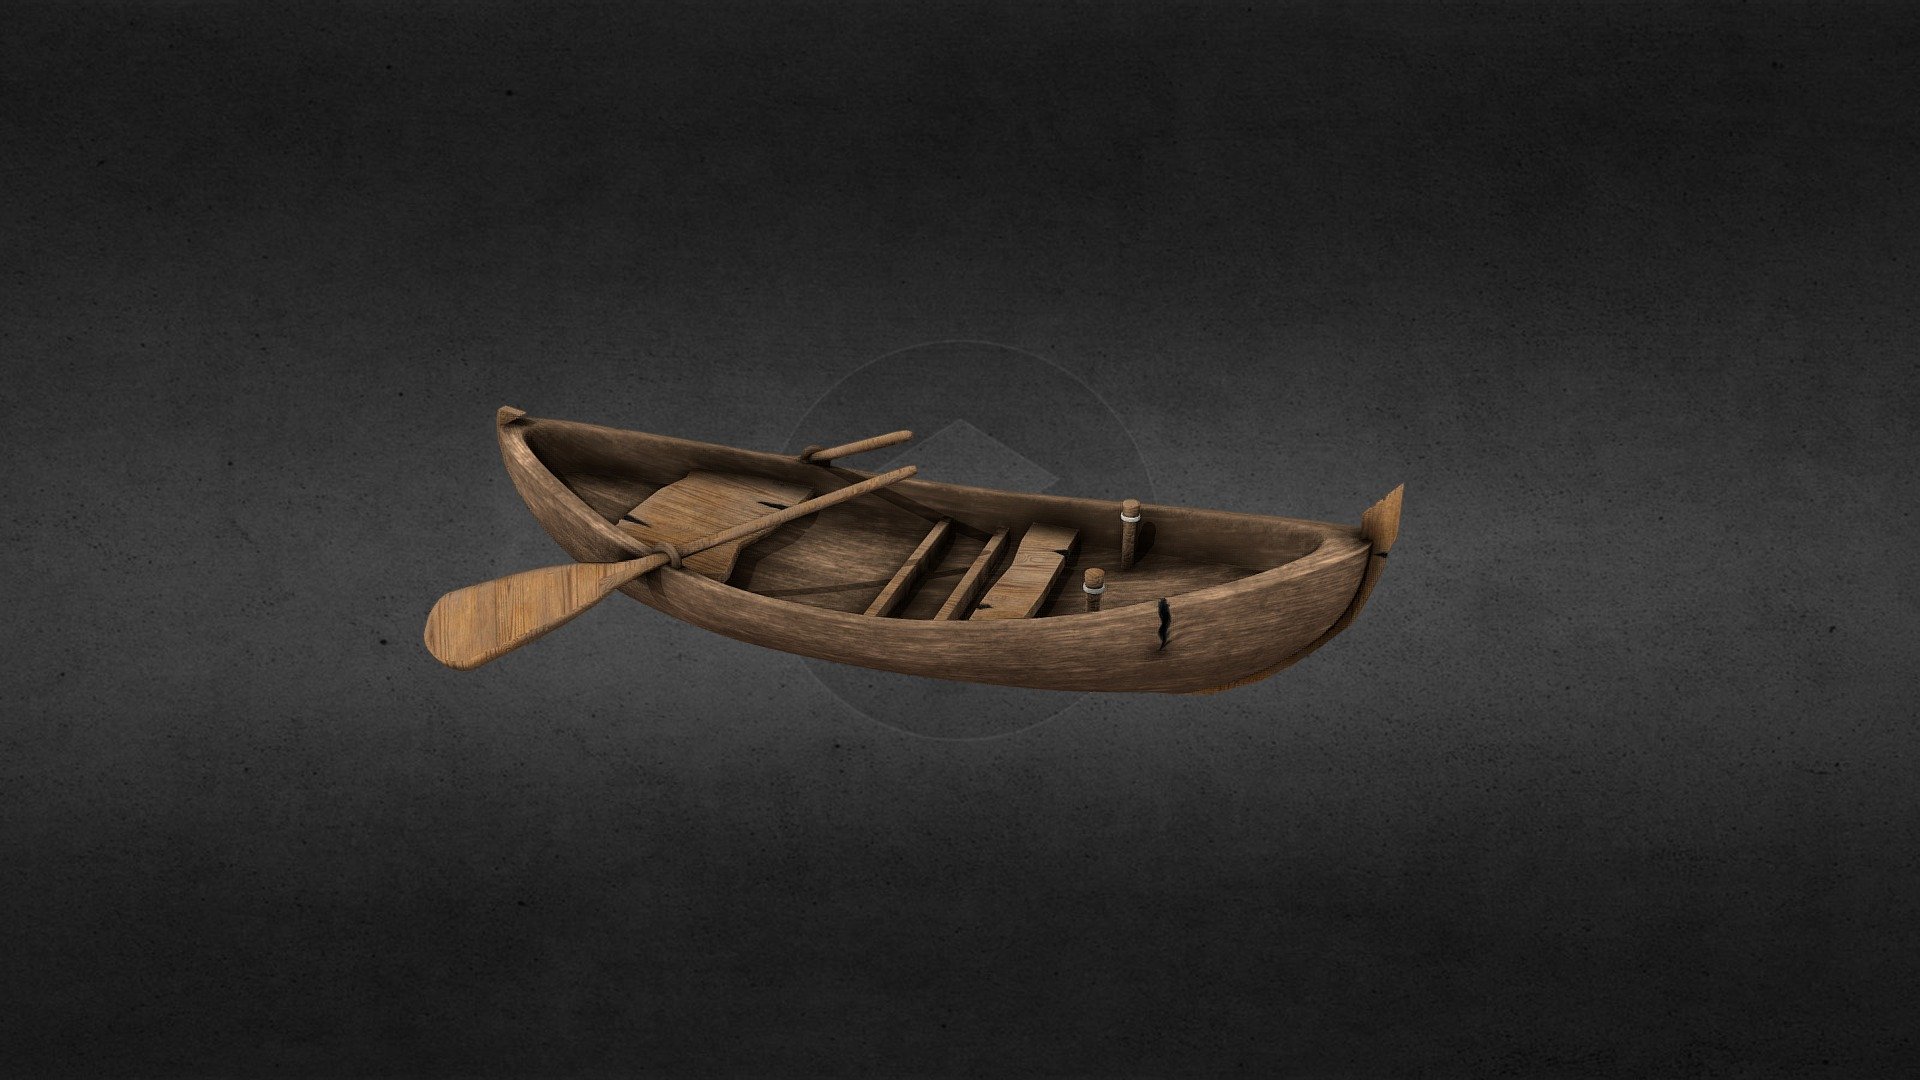 This is a wooden boat. This wooden boat seems to be quite old. suitable for ancient style, or war ruins. Can be used to make movies or as a model for games. This boat can be used to cross rivers, lakes, and seas 3d model